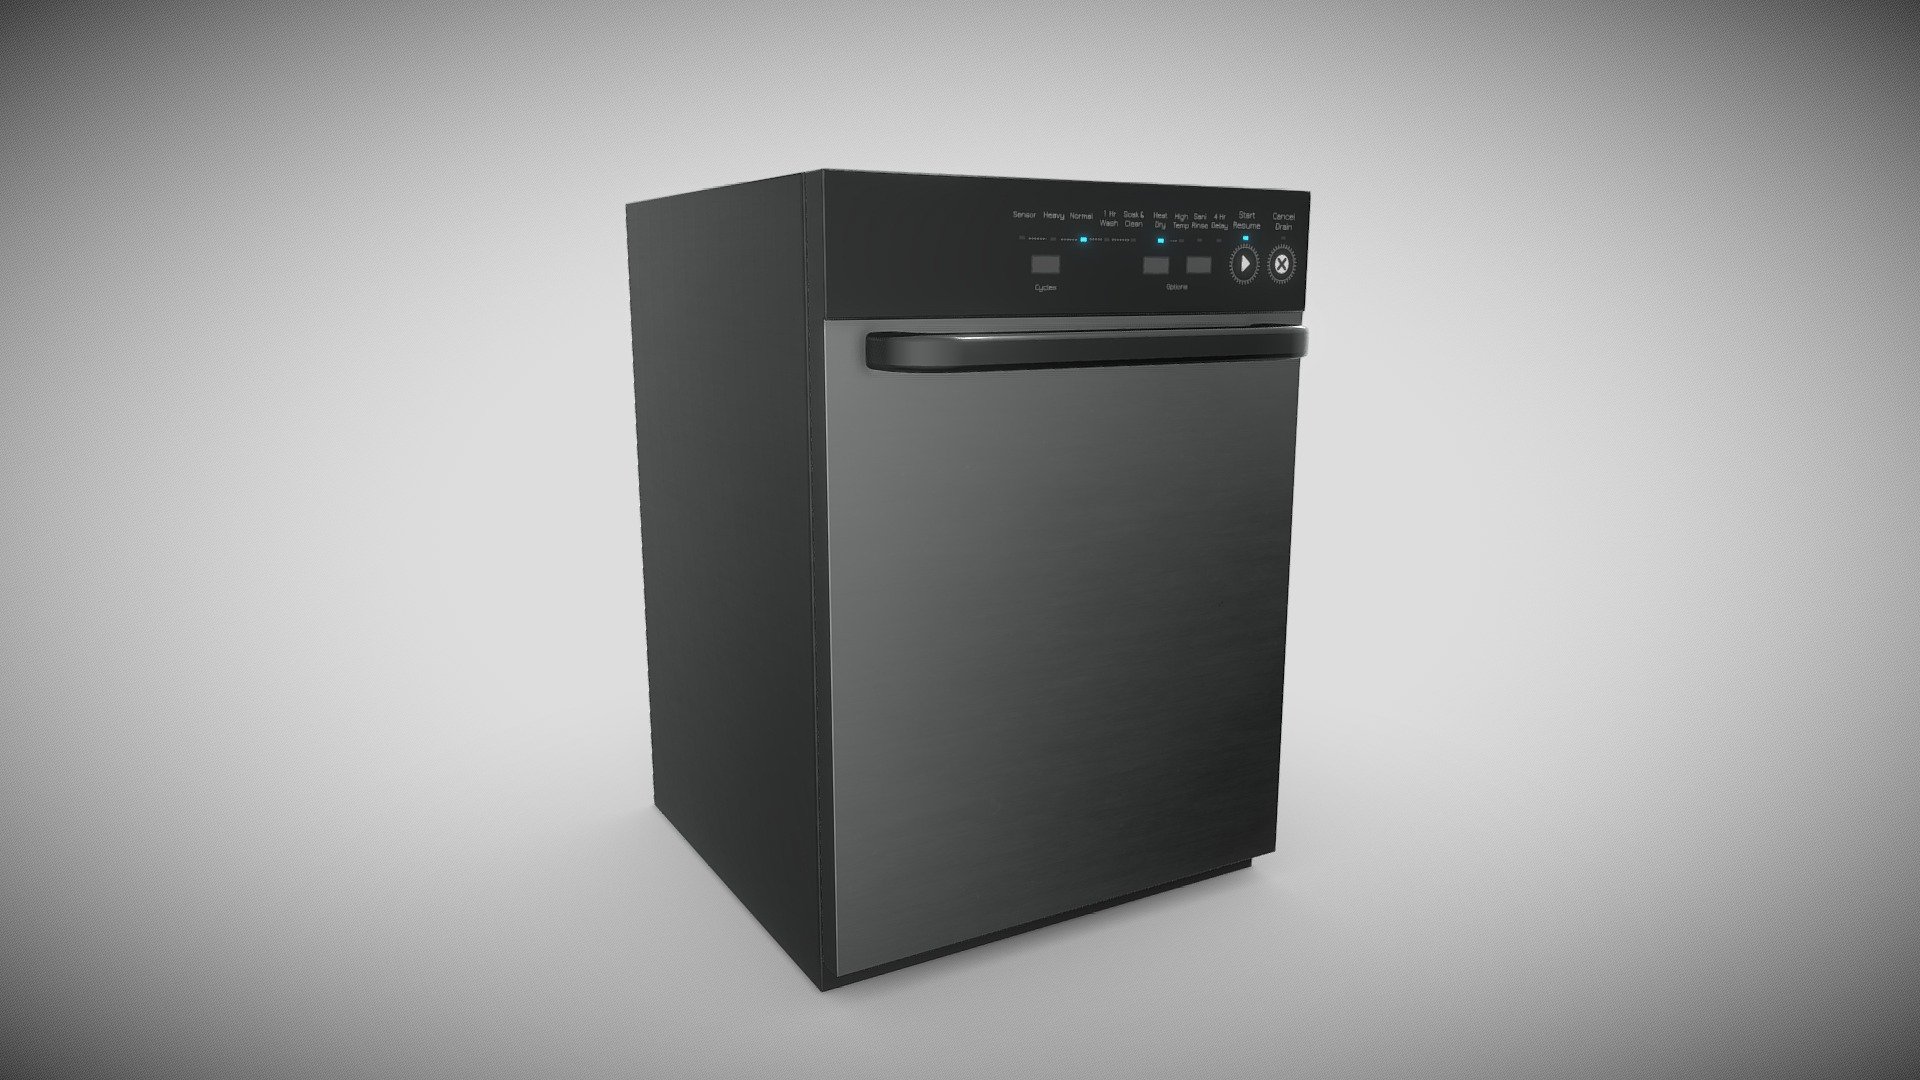 Dishwasher modeled in Cinema 4D and painted in Adobe Substance Painter for a kitchen project 3d model